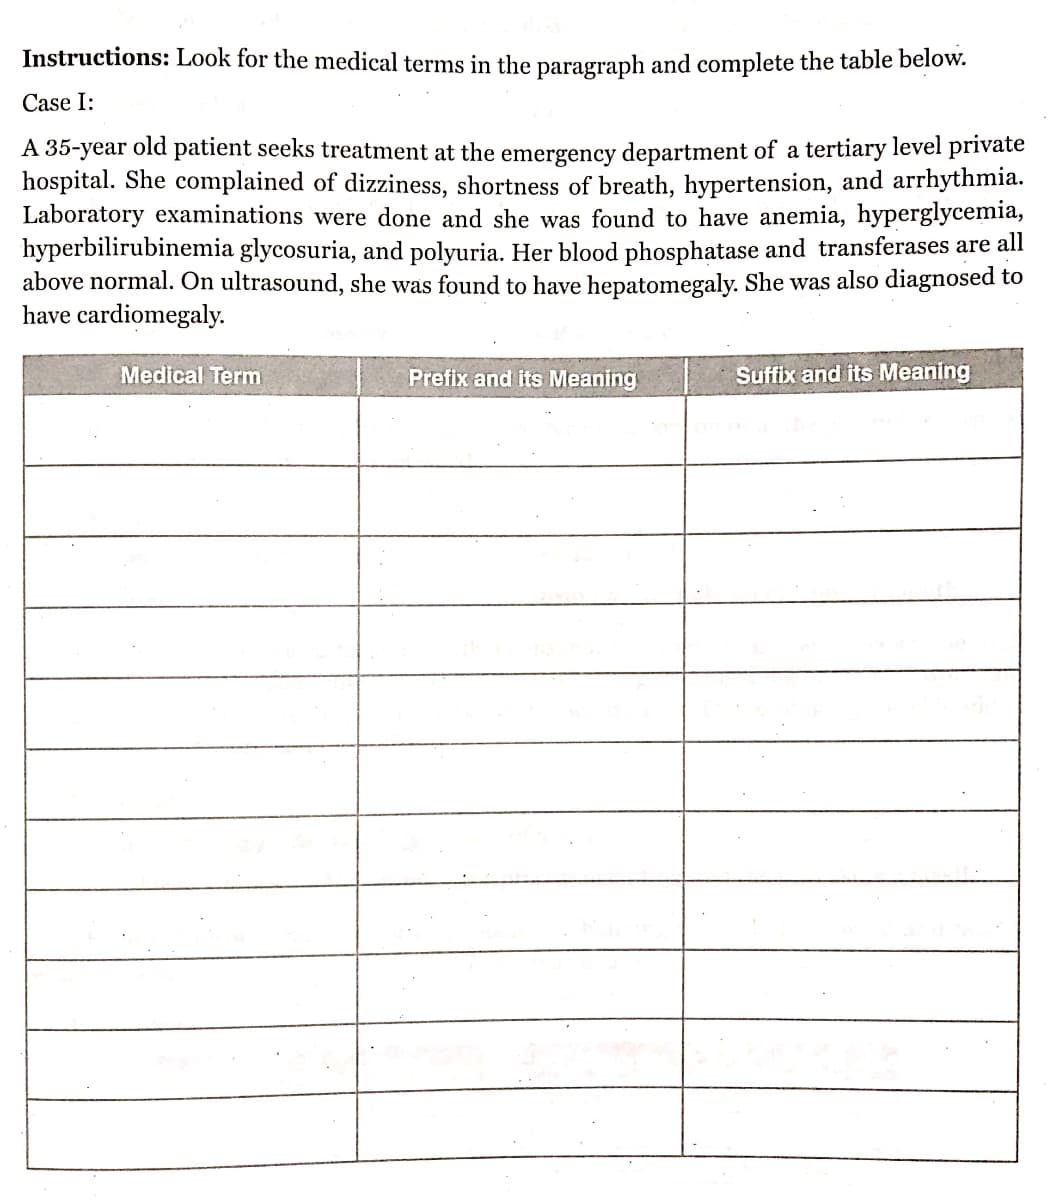 Instructions: Look for the medical terms in the paragraph and complete the table below.
Case I:
A 35-year old patient seeks treatment at the emergency department of a tertiary level private
hospital. She complained of dizziness, shortness of breath, hypertension, and arrhythmia.
Laboratory examinations were done and she was found to have anemia, hyperglycemia,
hyperbilirubinemia glycosuria, and polyuria. Her blood phosphatase and transferases are all
above normal. On ultrasound, she was found to have hepatomegaly. She was also diagnosed to
have cardiomegaly.
Medical Term
Prefix and its Meaning
Suffix and its Meaning
